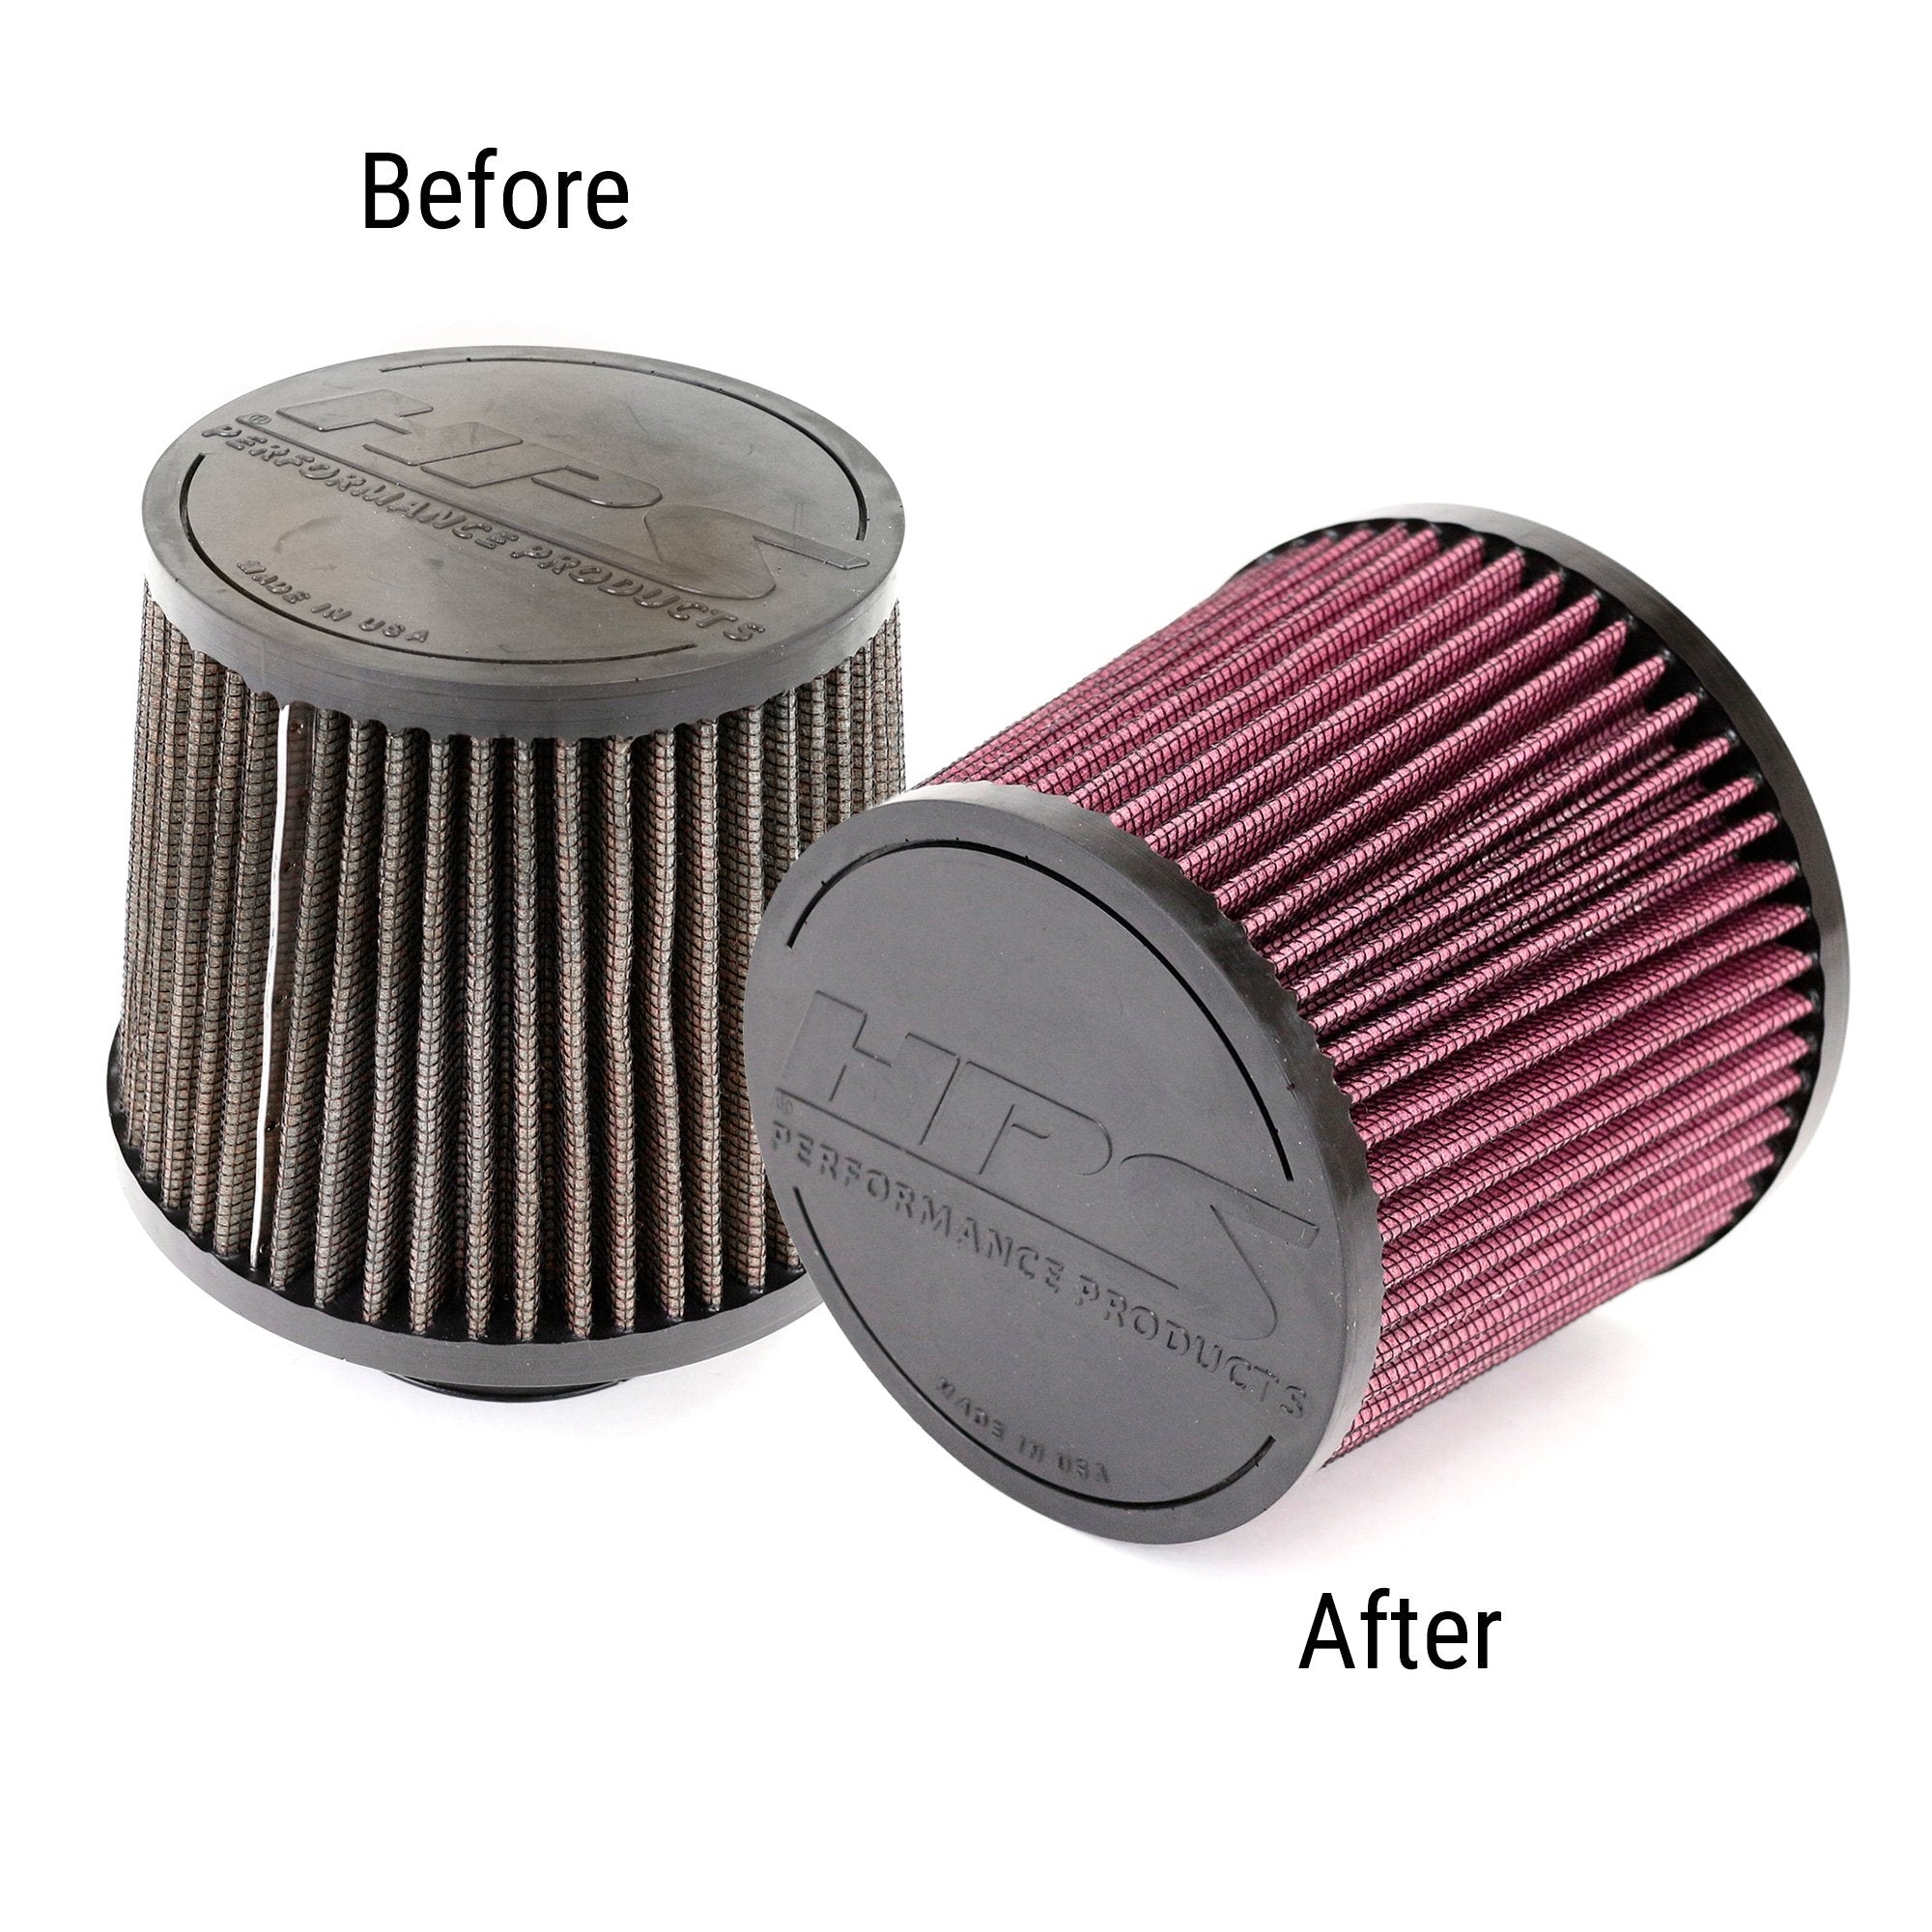 HPS Performance Air Filter Cleaning and Synthetic Oil Recharge Kit